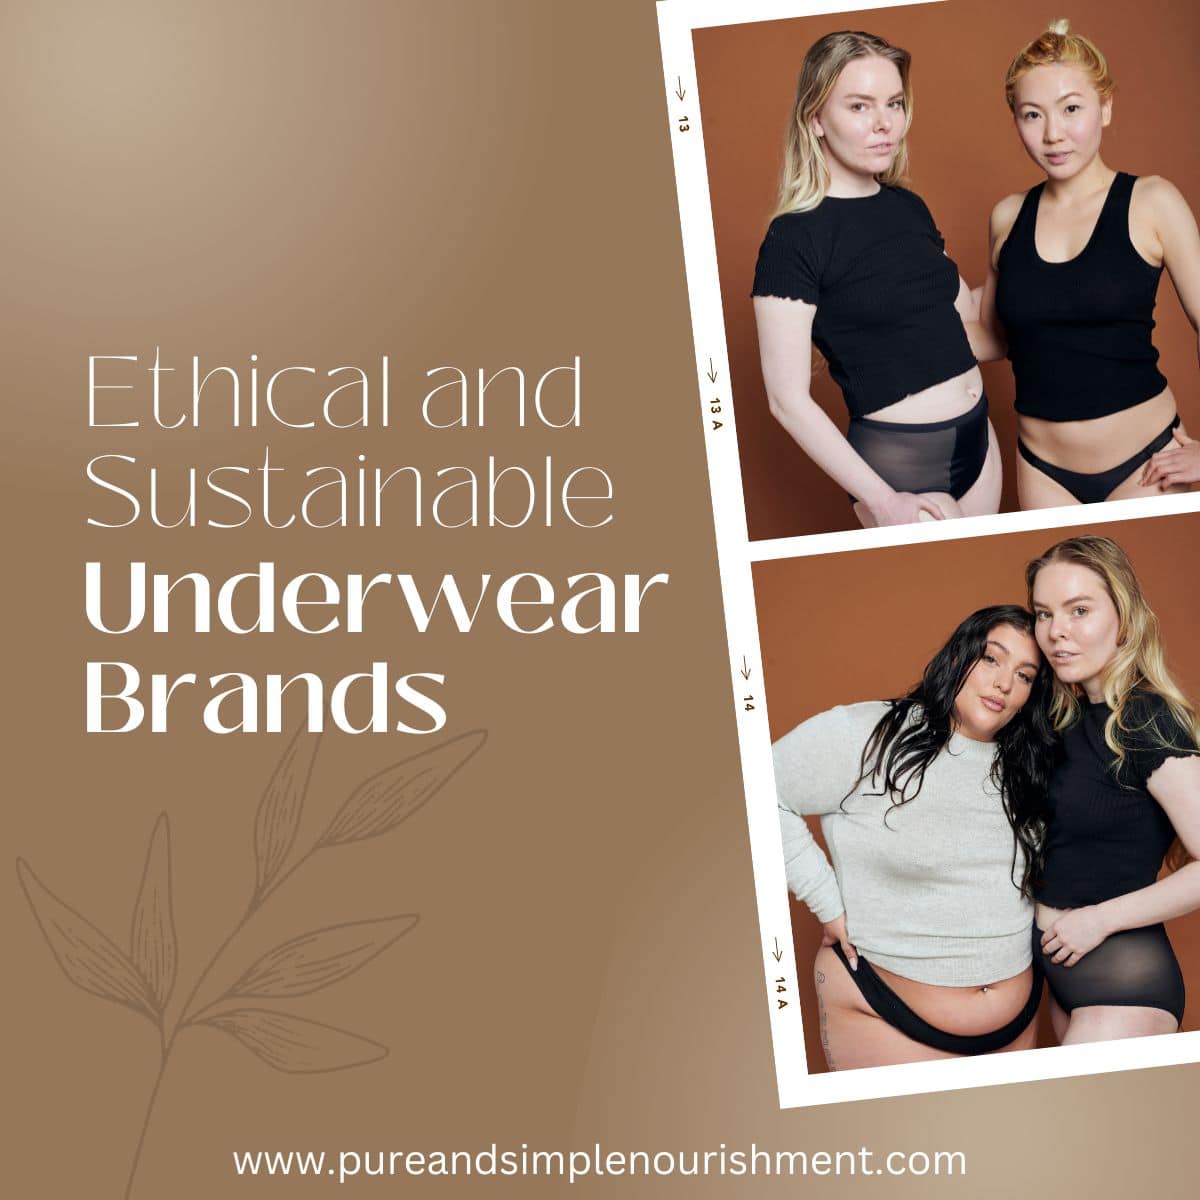 Four women in different styles of underwear, bras, t-shirts and tank tops with the title "Ethical and Sustainable Underwear Brands" next to them.